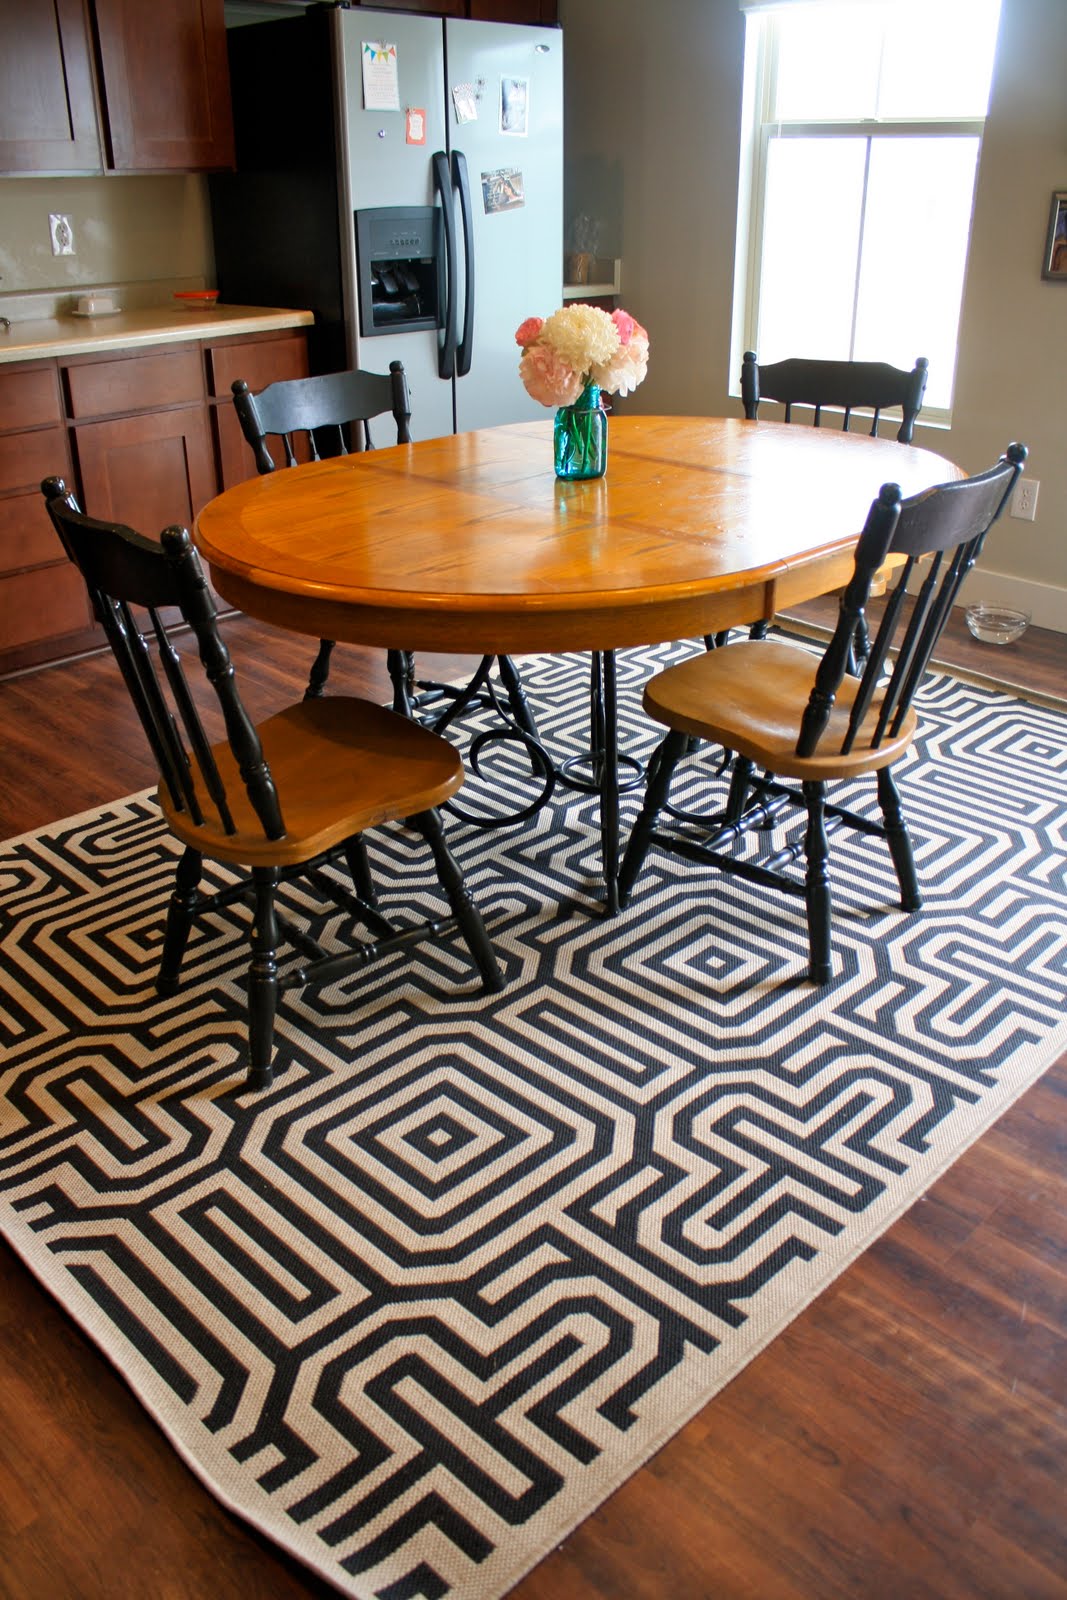 A-rug-that-brings-life-and-vitality-into-an-otherwise-simplistic-dining-room